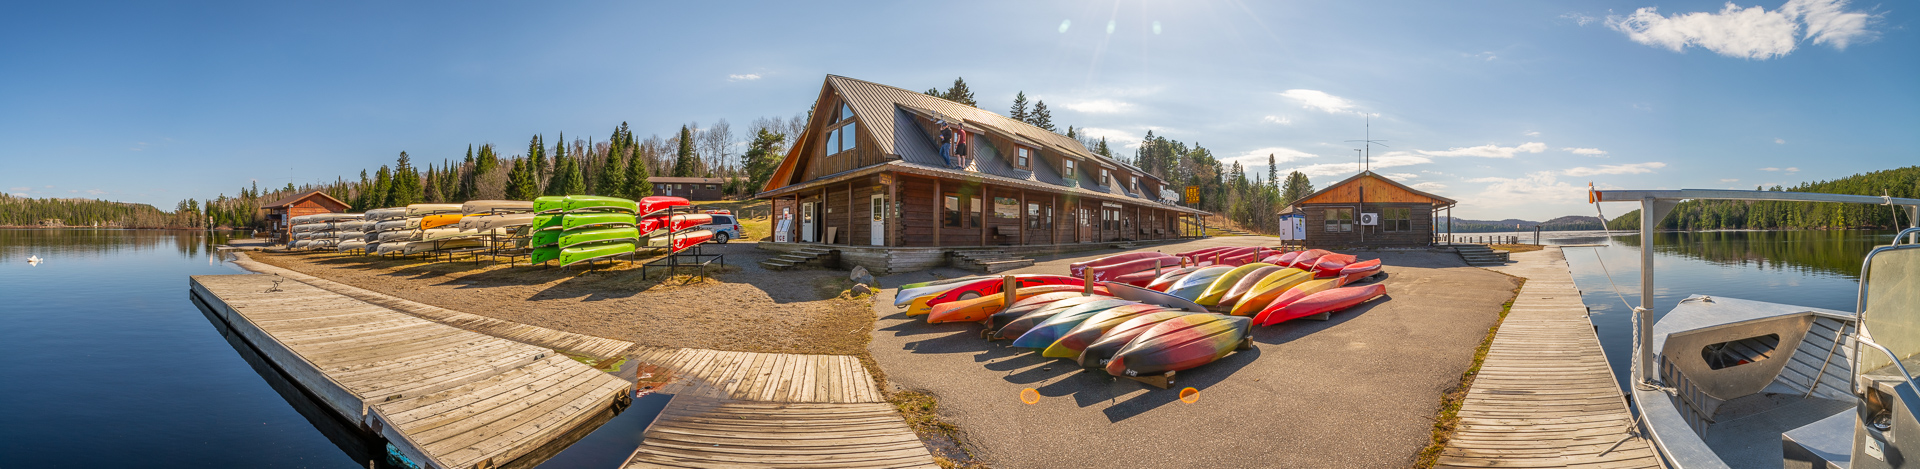 Algonquin Outfitters, Lake Opeongo